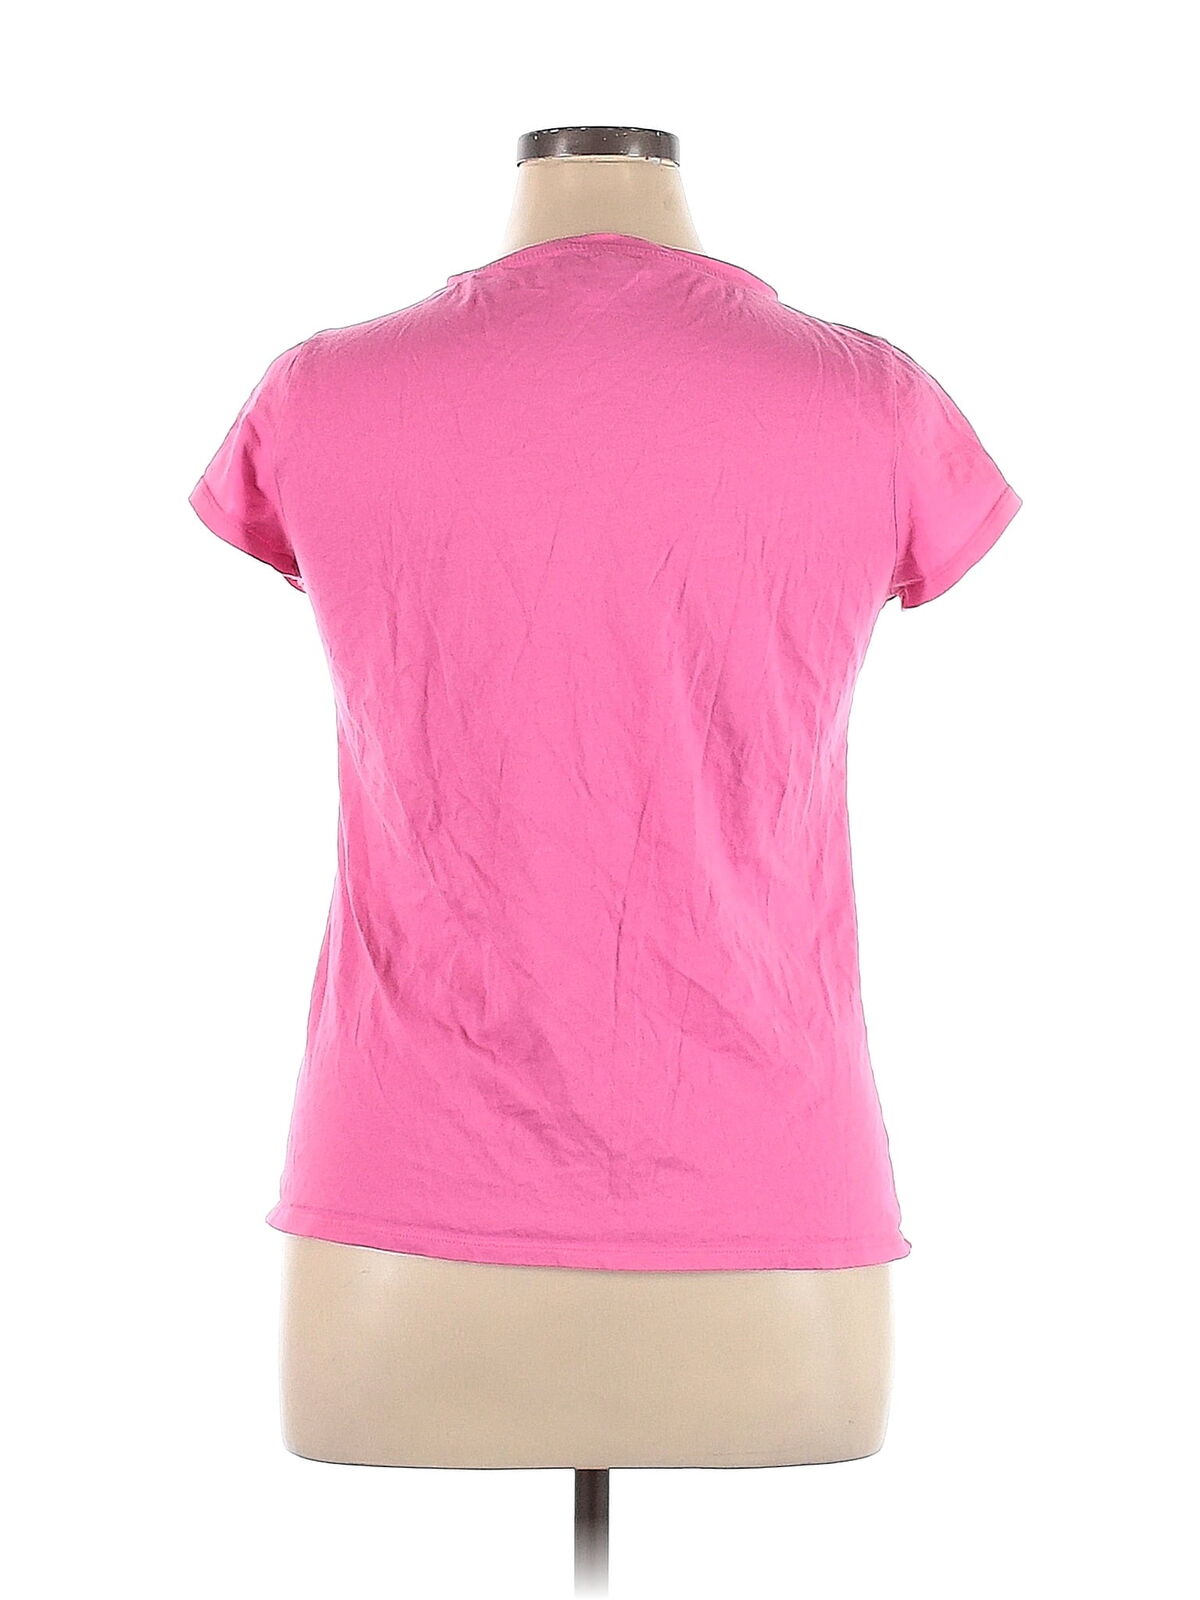 Juicy Couture Women Pink Short Sleeve T-Shirt XL - image 2